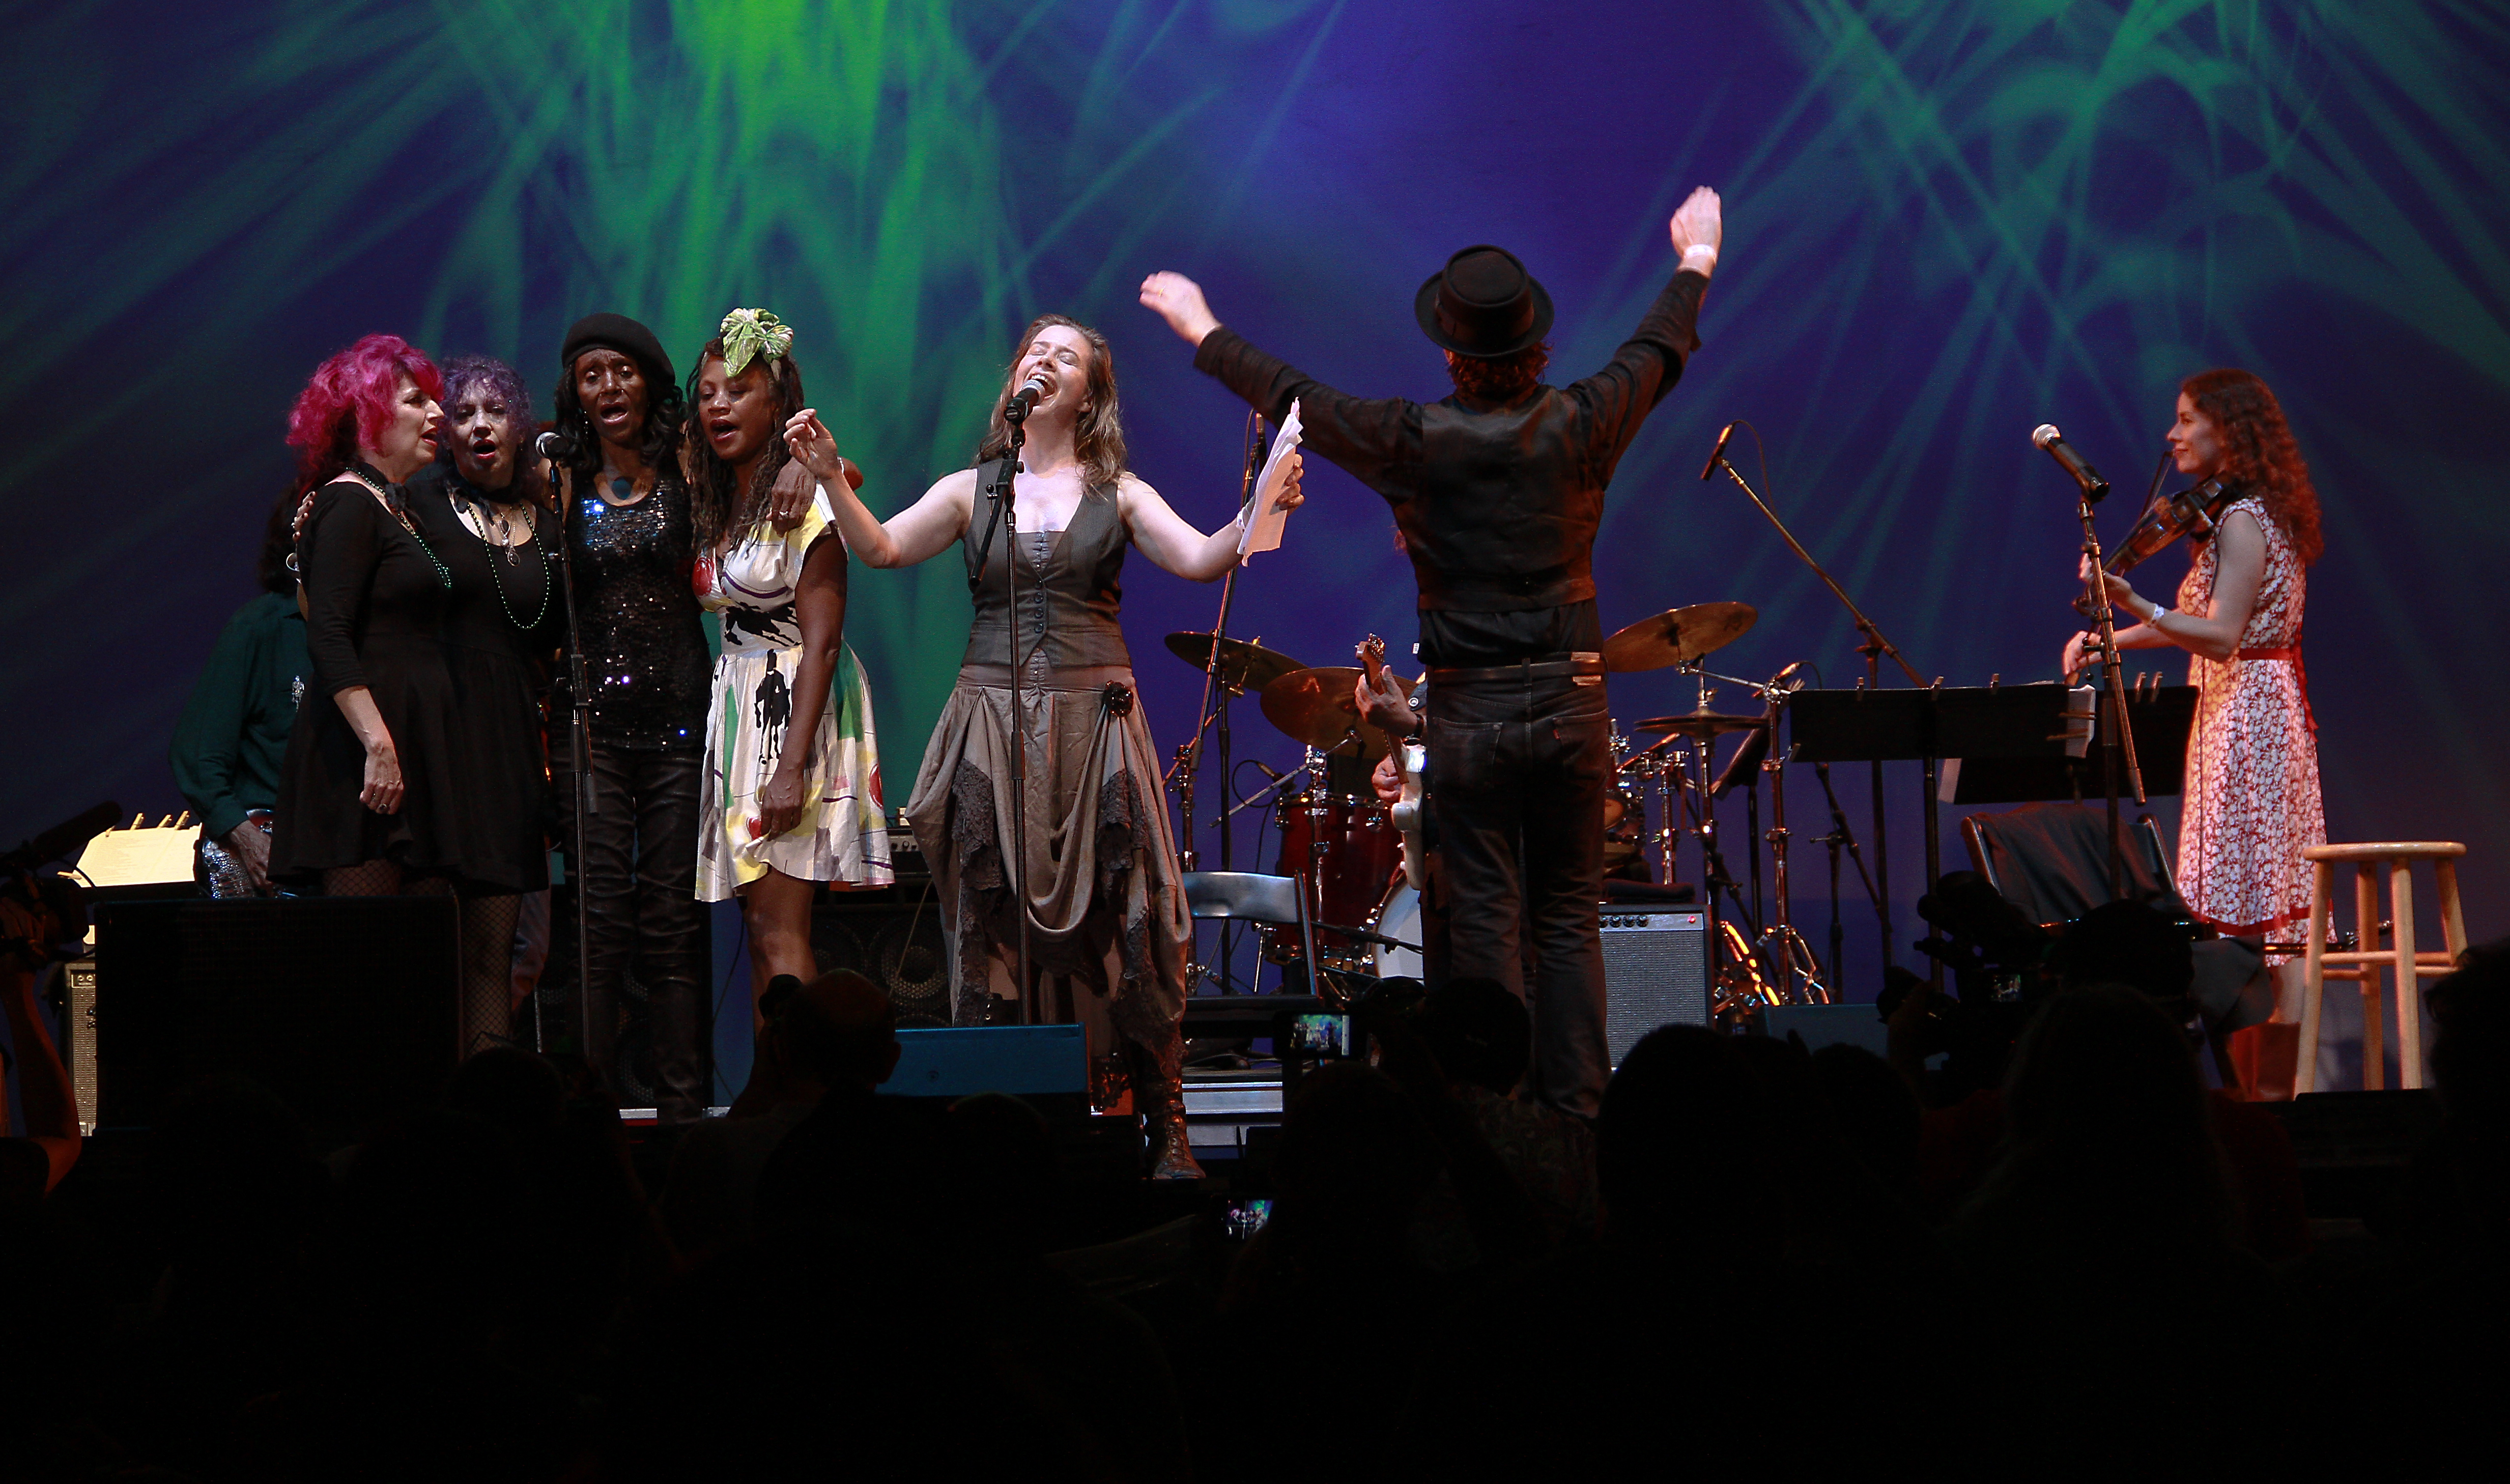 Dana Sings Lincoln Center Ourland 2012 with Joe Hurley conducting, Tish & Snooky, Tami Lynn, and Sheryl Marshall, the boys from Blue Coupe, (Alice Cooper and Blue Oyster Cult) and Music Director Chris Flynn 